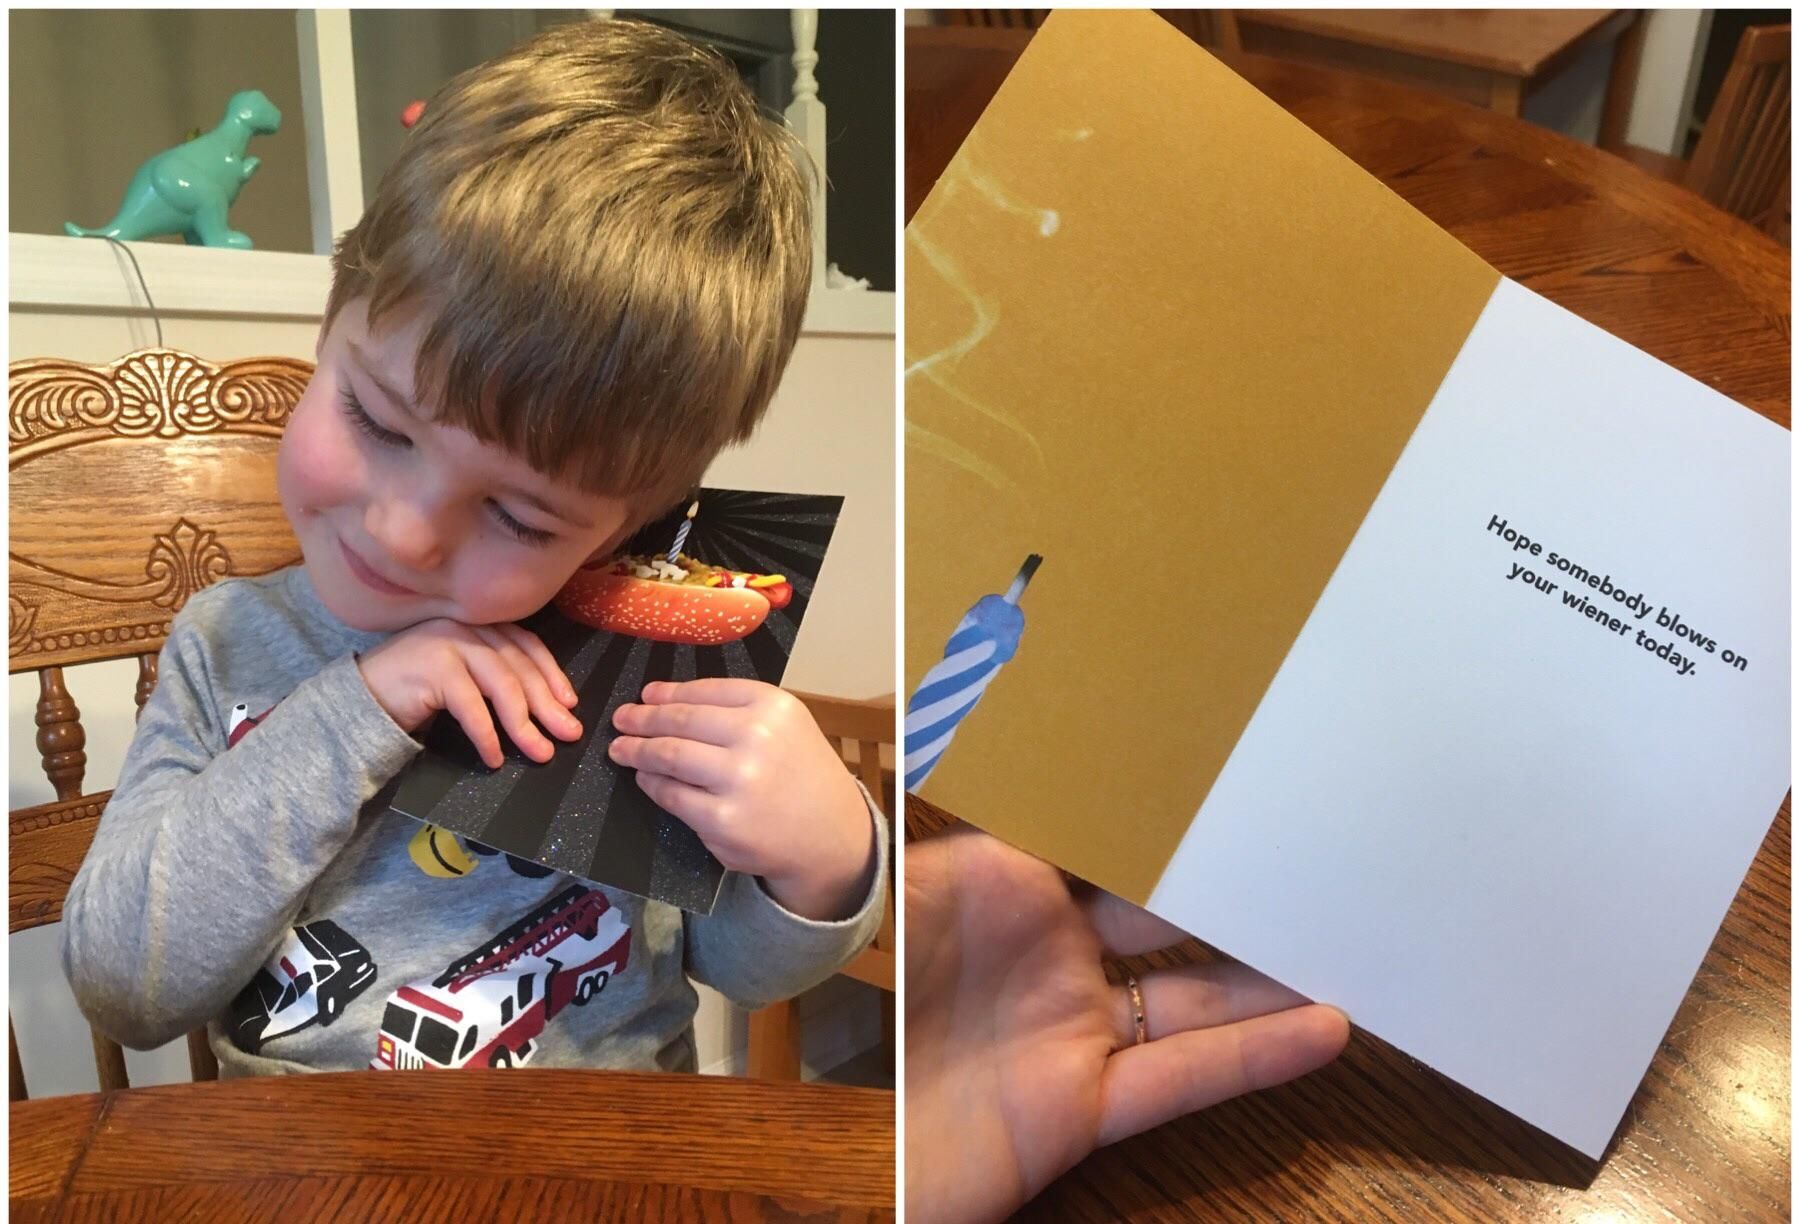 My toddler picked out a “super cool hot dog card” for his favorite uncle.